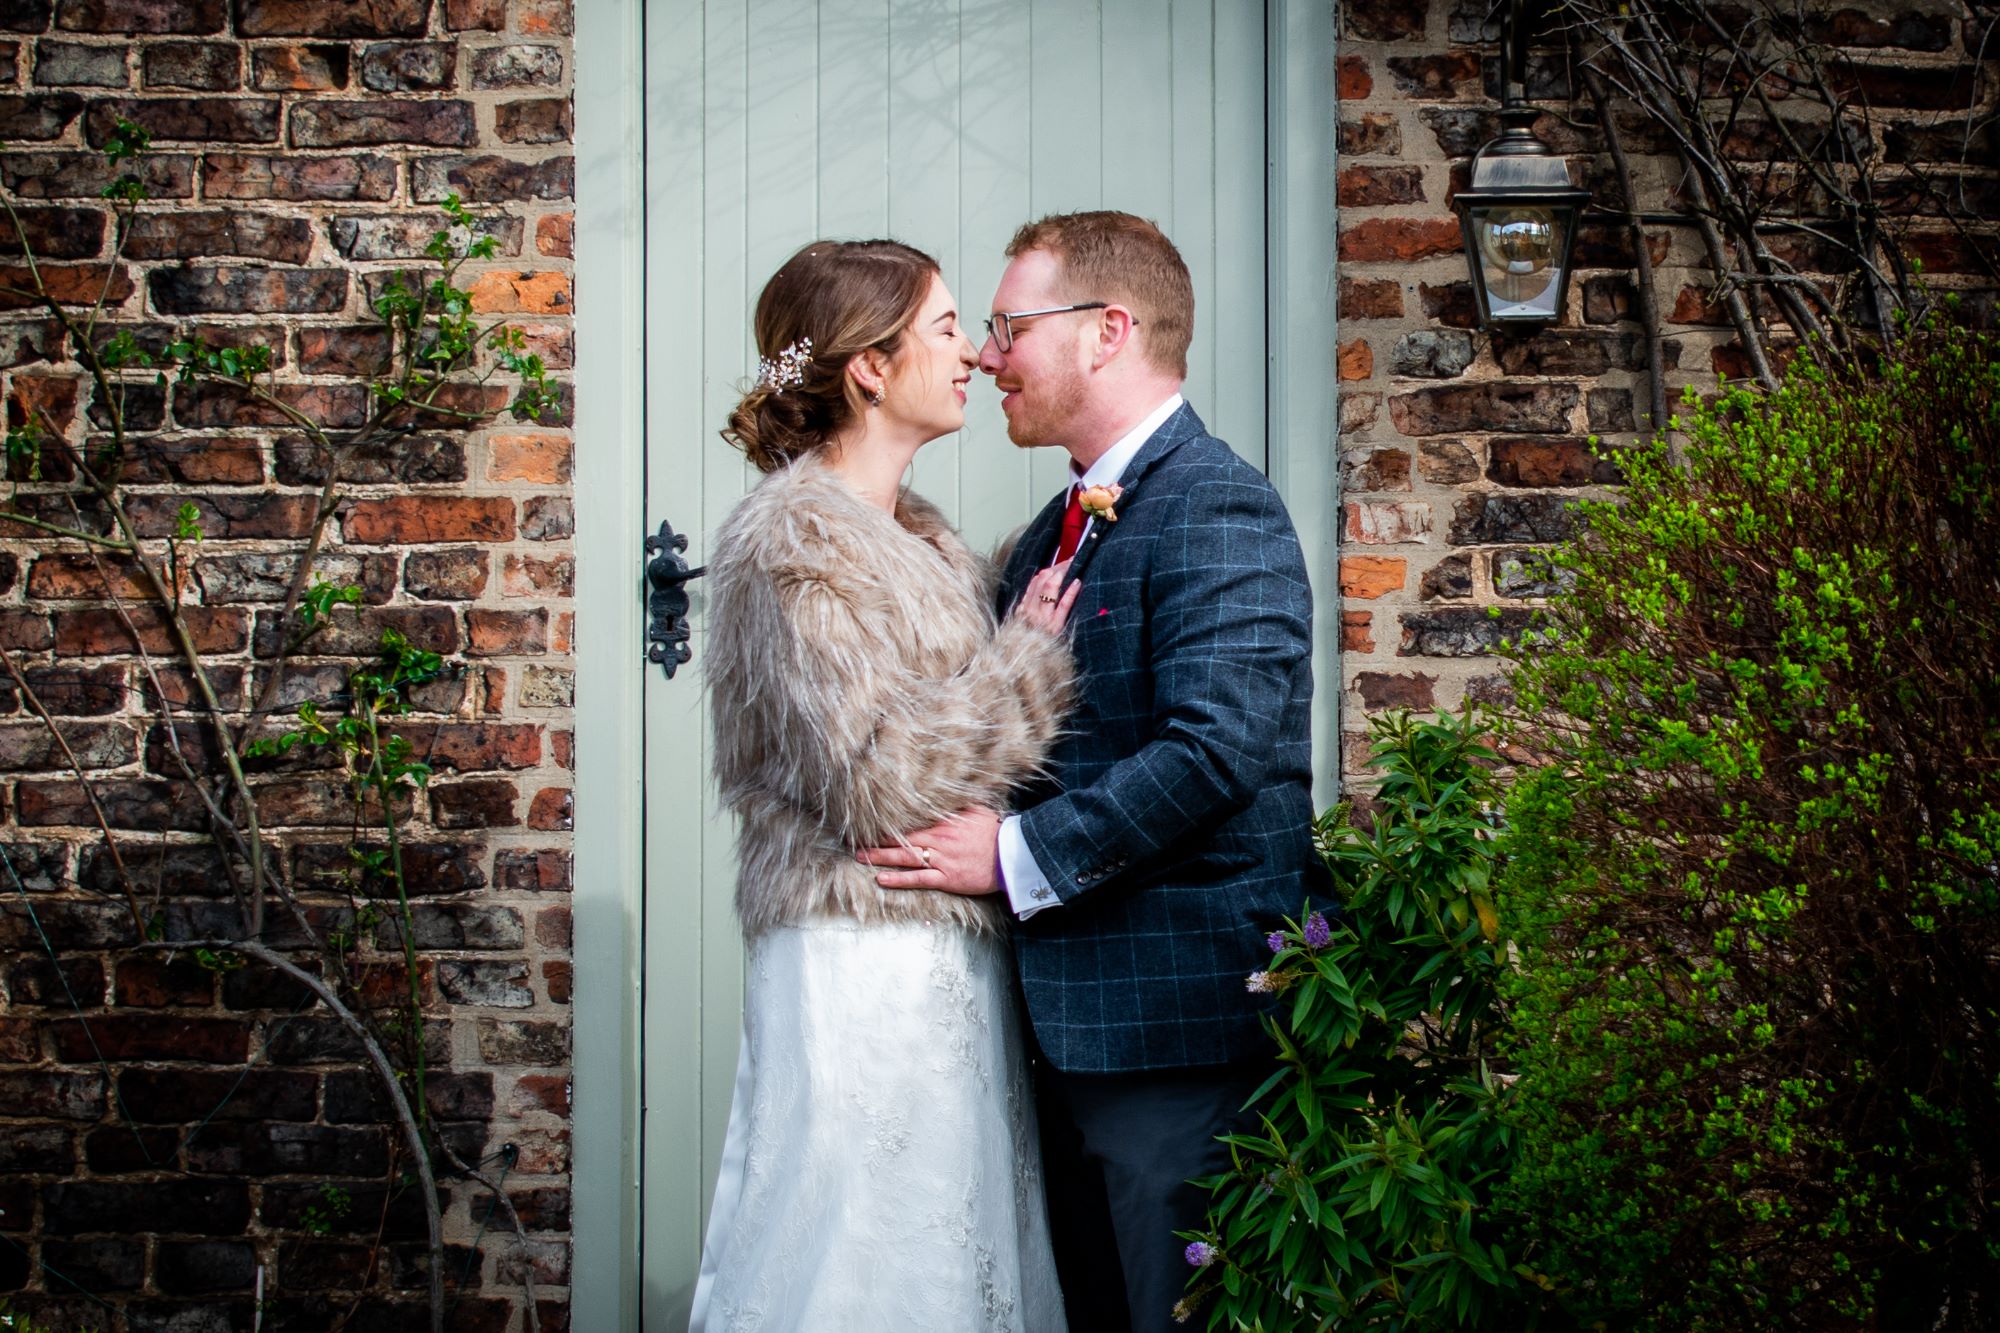 the bride and groom touch noses as they embrace infront of a cottage door.